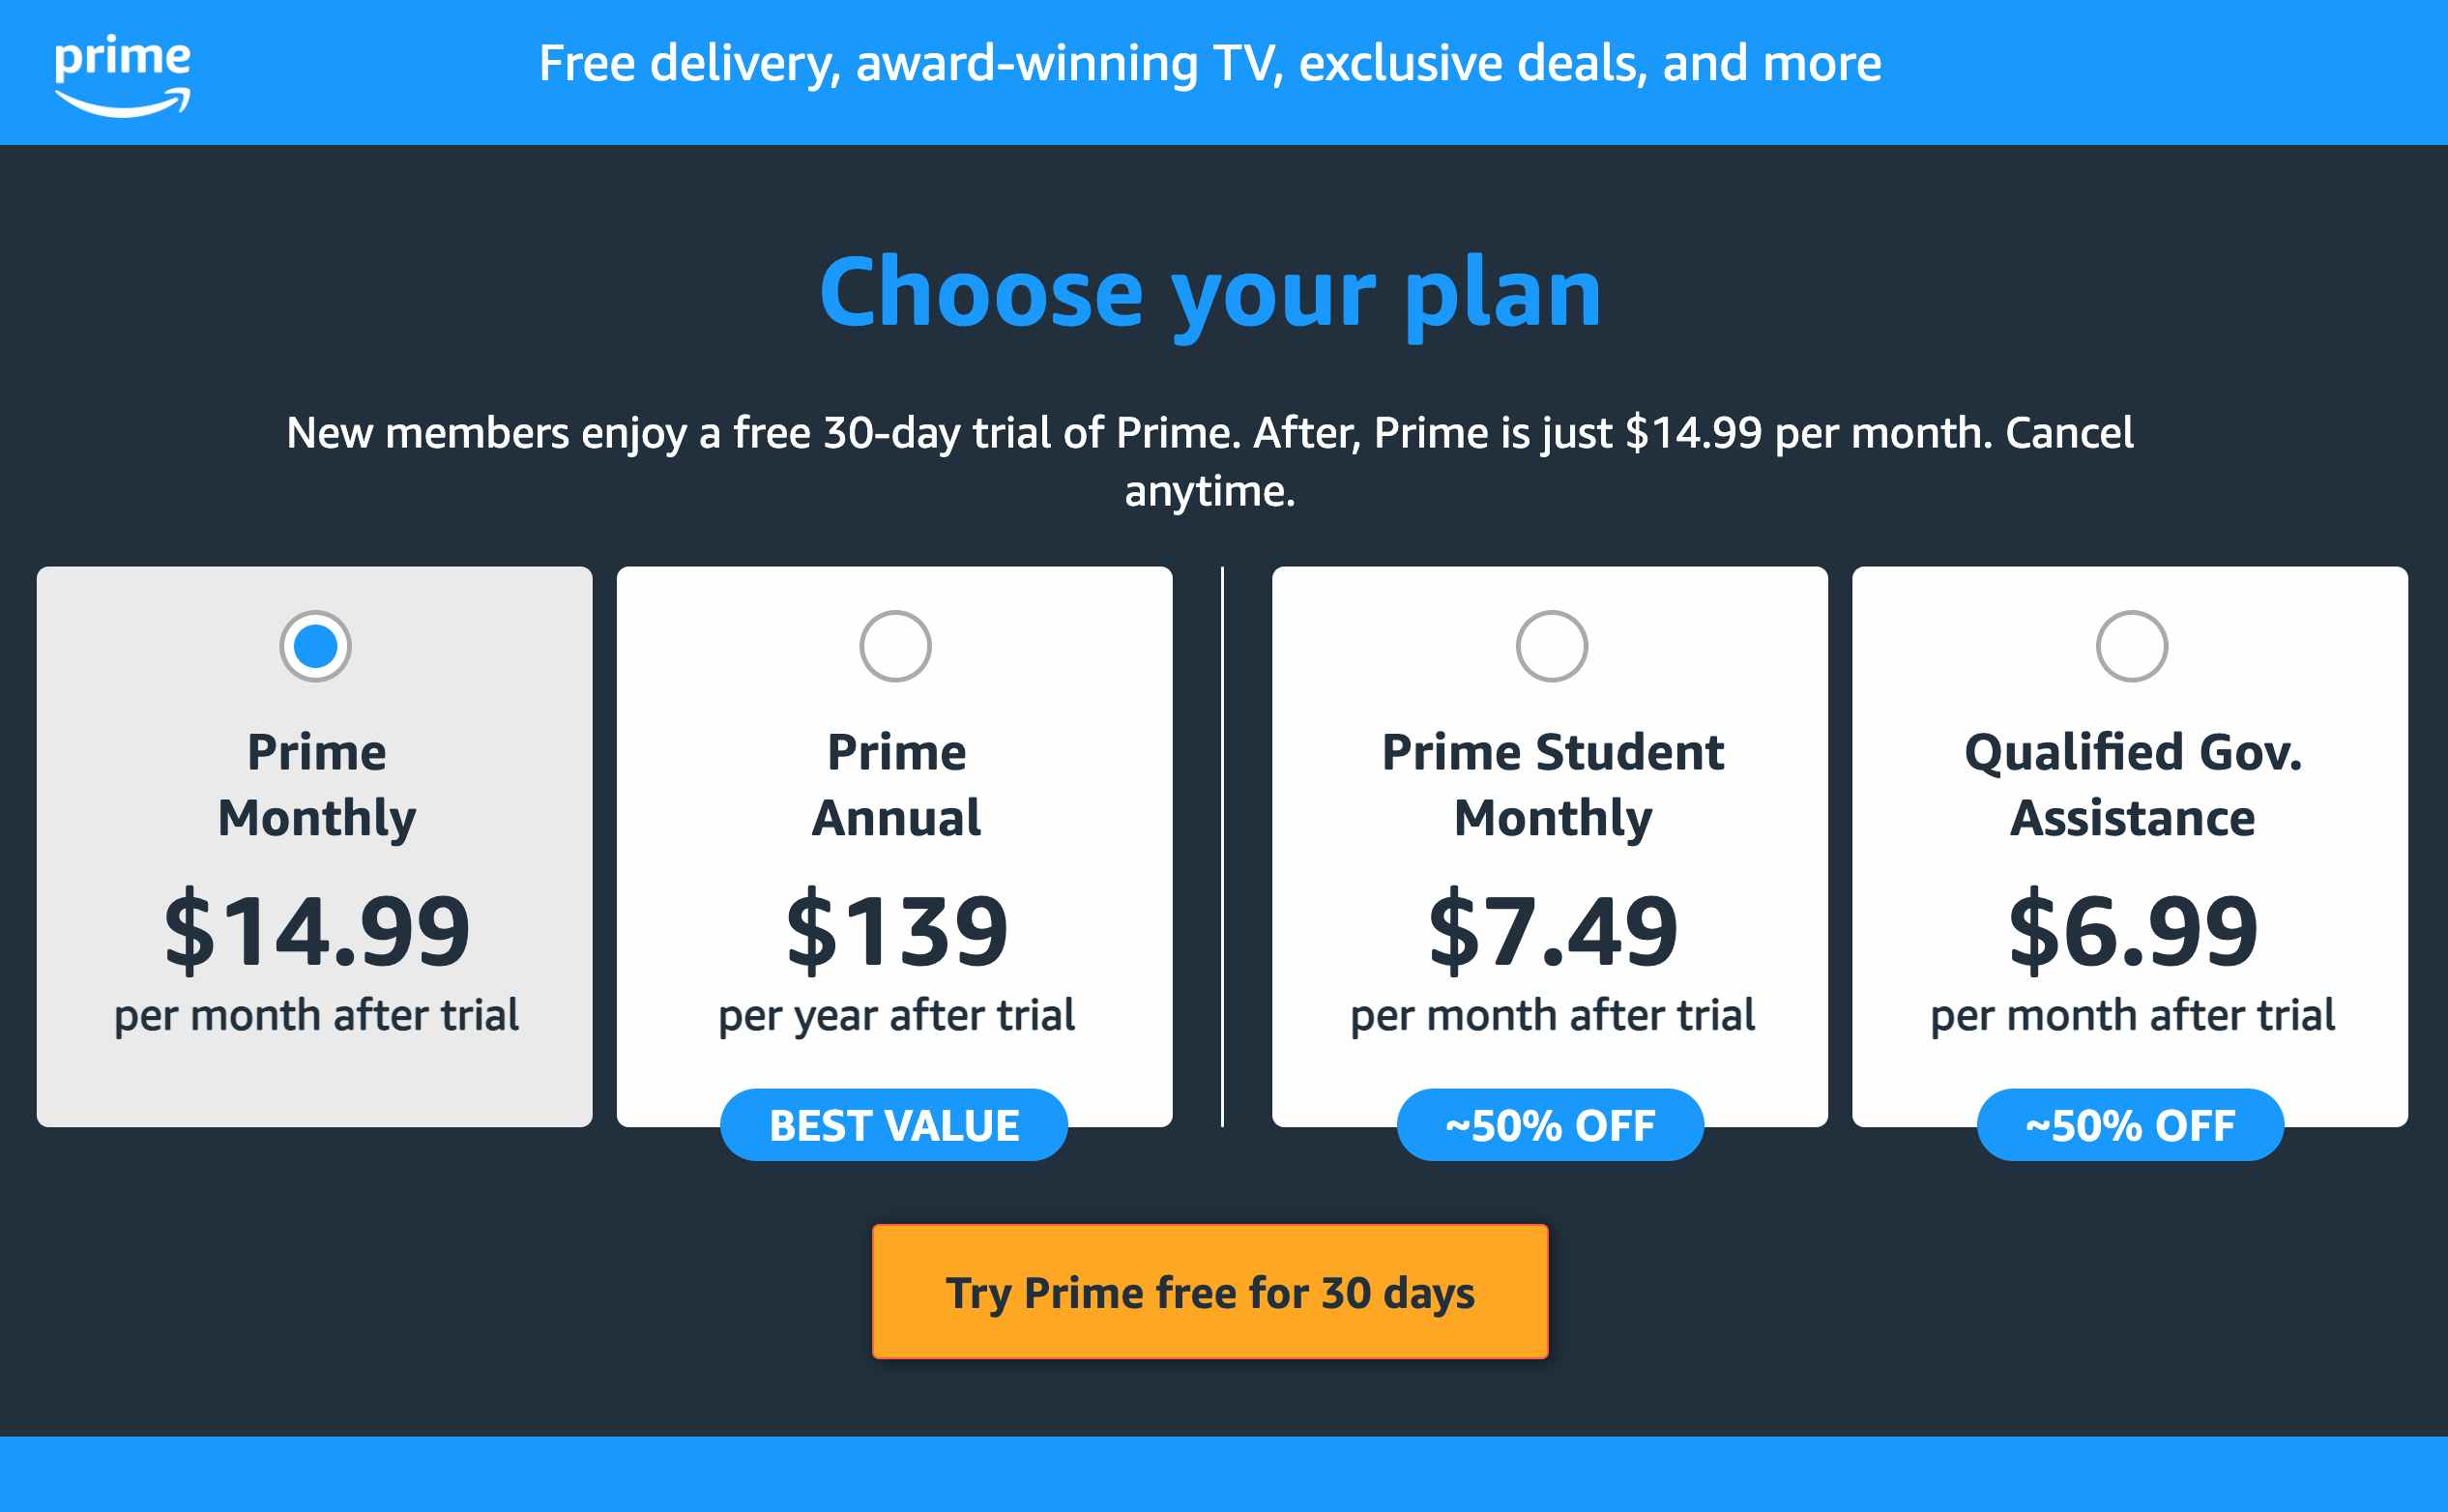 https://prod-cdn-thekrazycouponlady.imgix.net/wp-content/uploads/2021/12/amazon-prime-annual-monthly-cost-screenshot-2022-1653321274-1653321275.png?auto=format&fit=fill&q=25